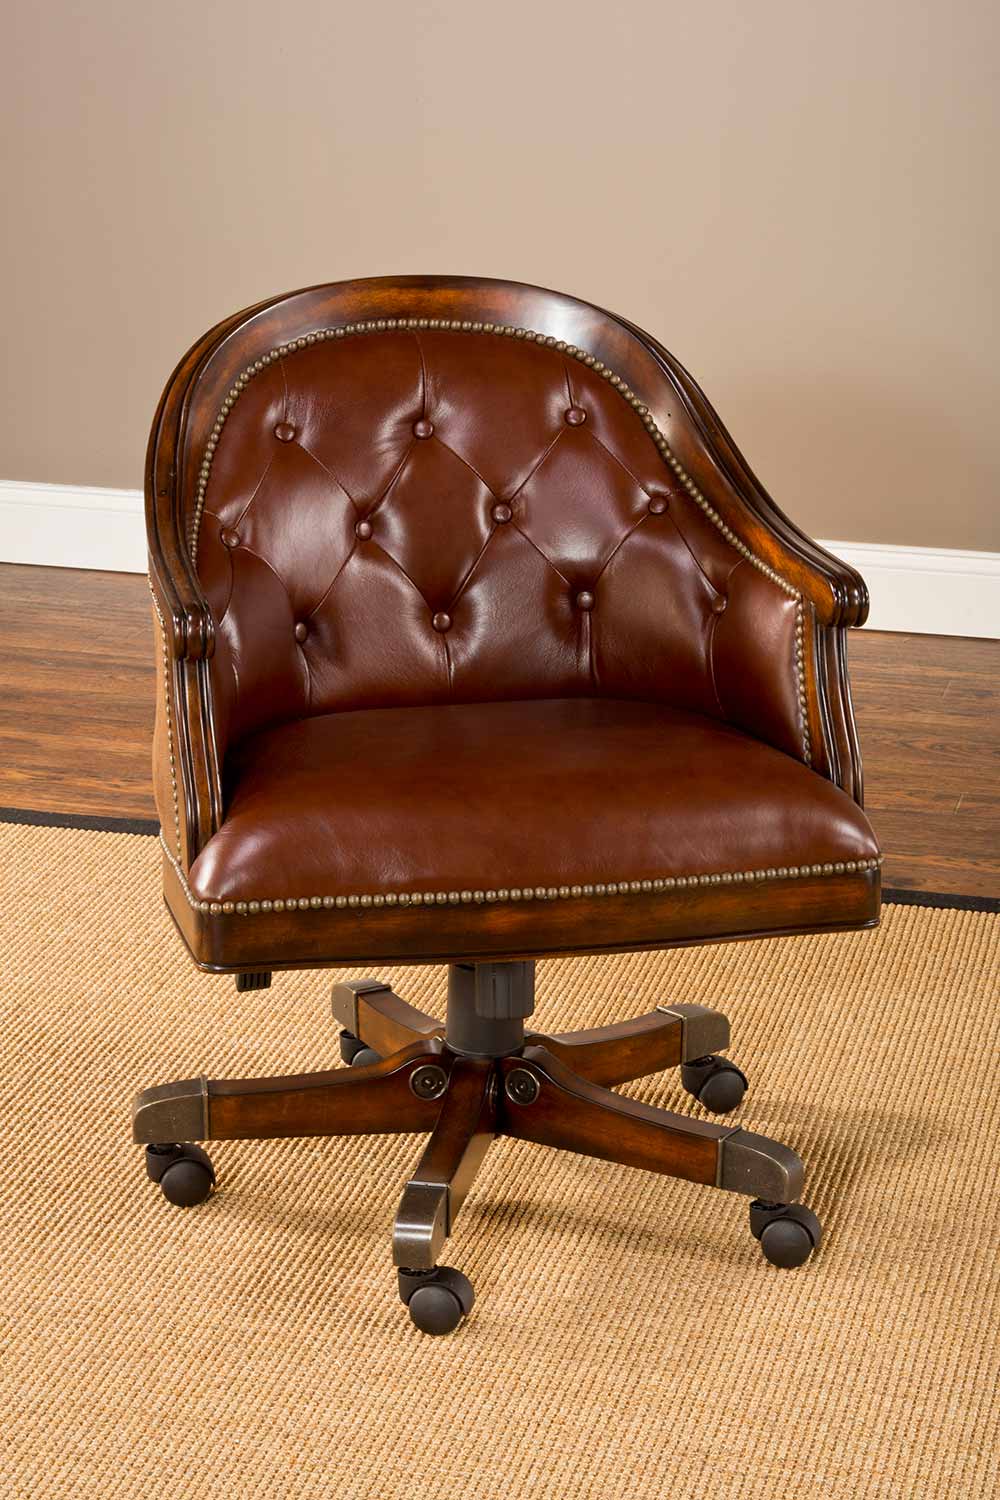 Hillsdale Harding Game Chair - Rich Cherry/Brown Leather